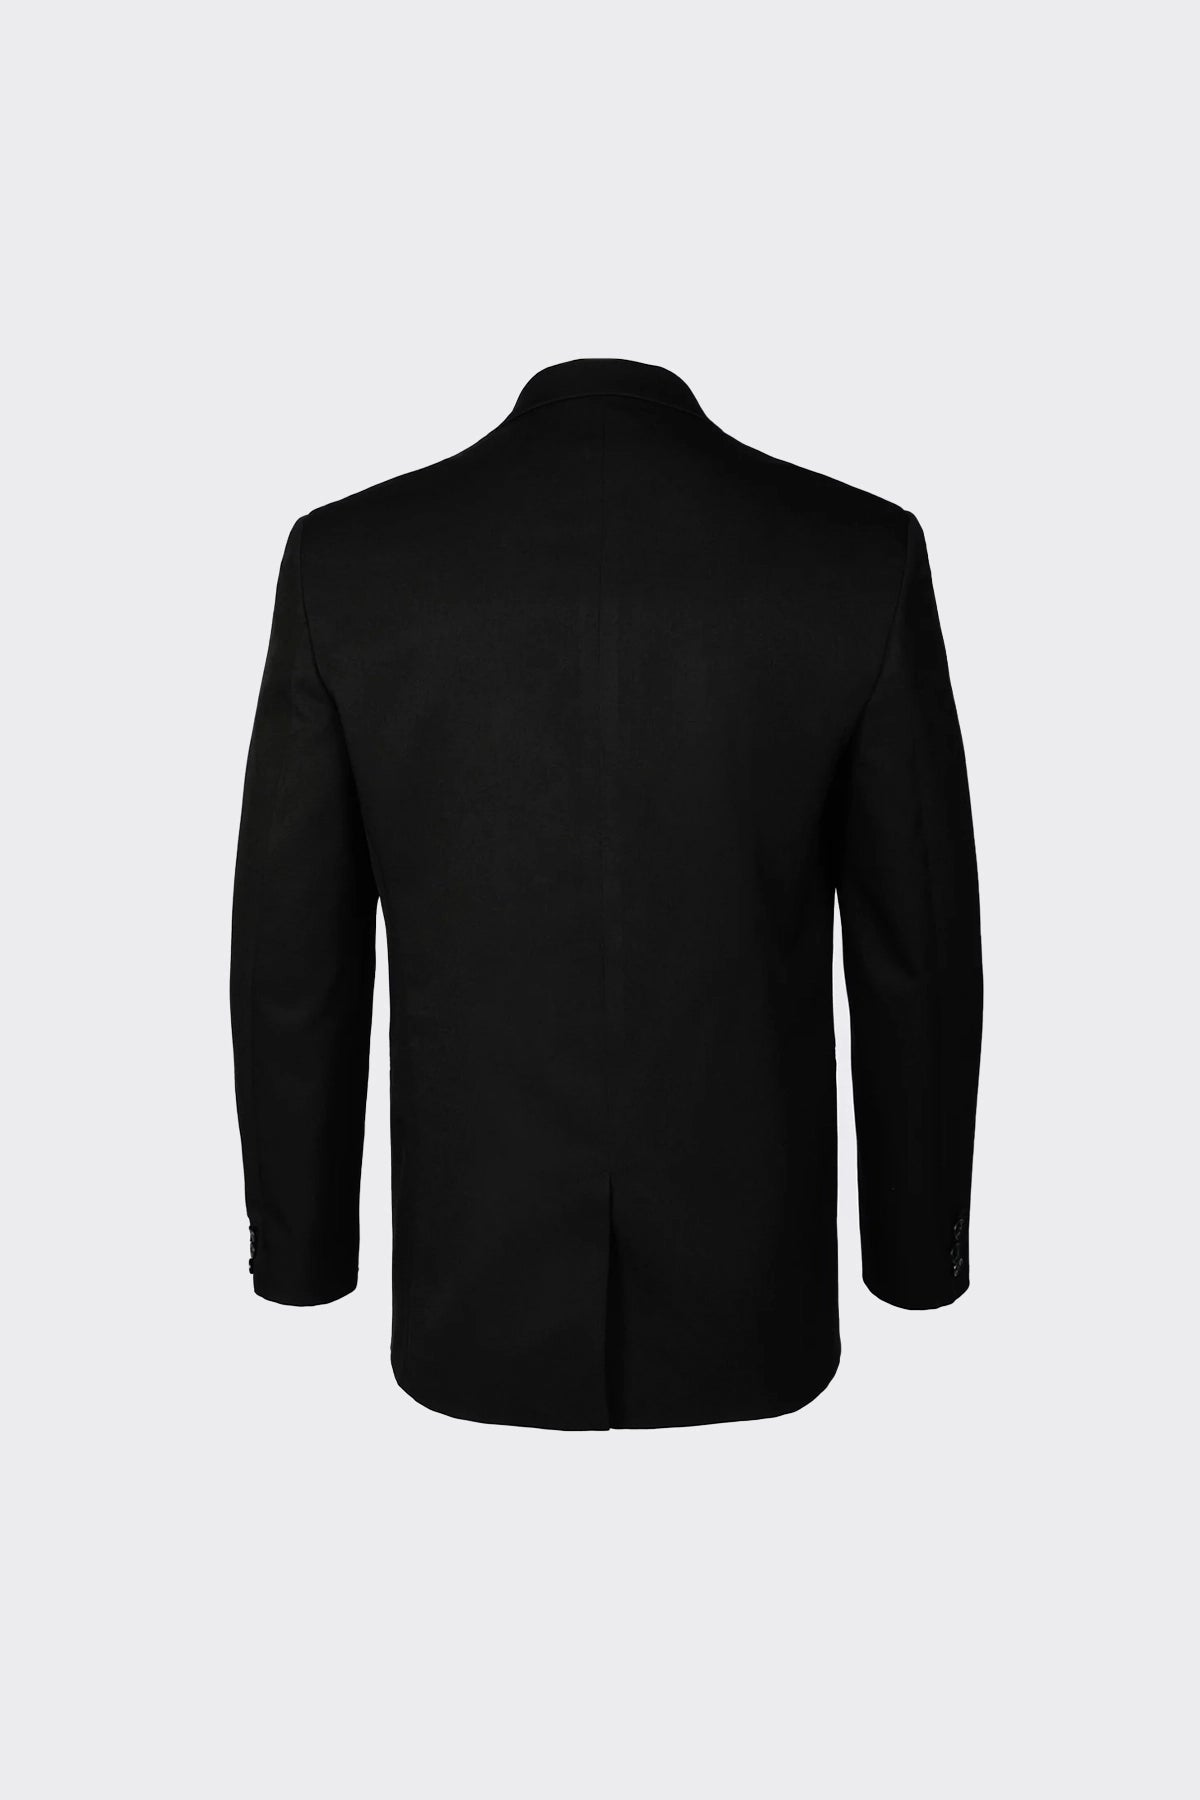 DOUBLE BREASTED SUIT JACKET | BLACK